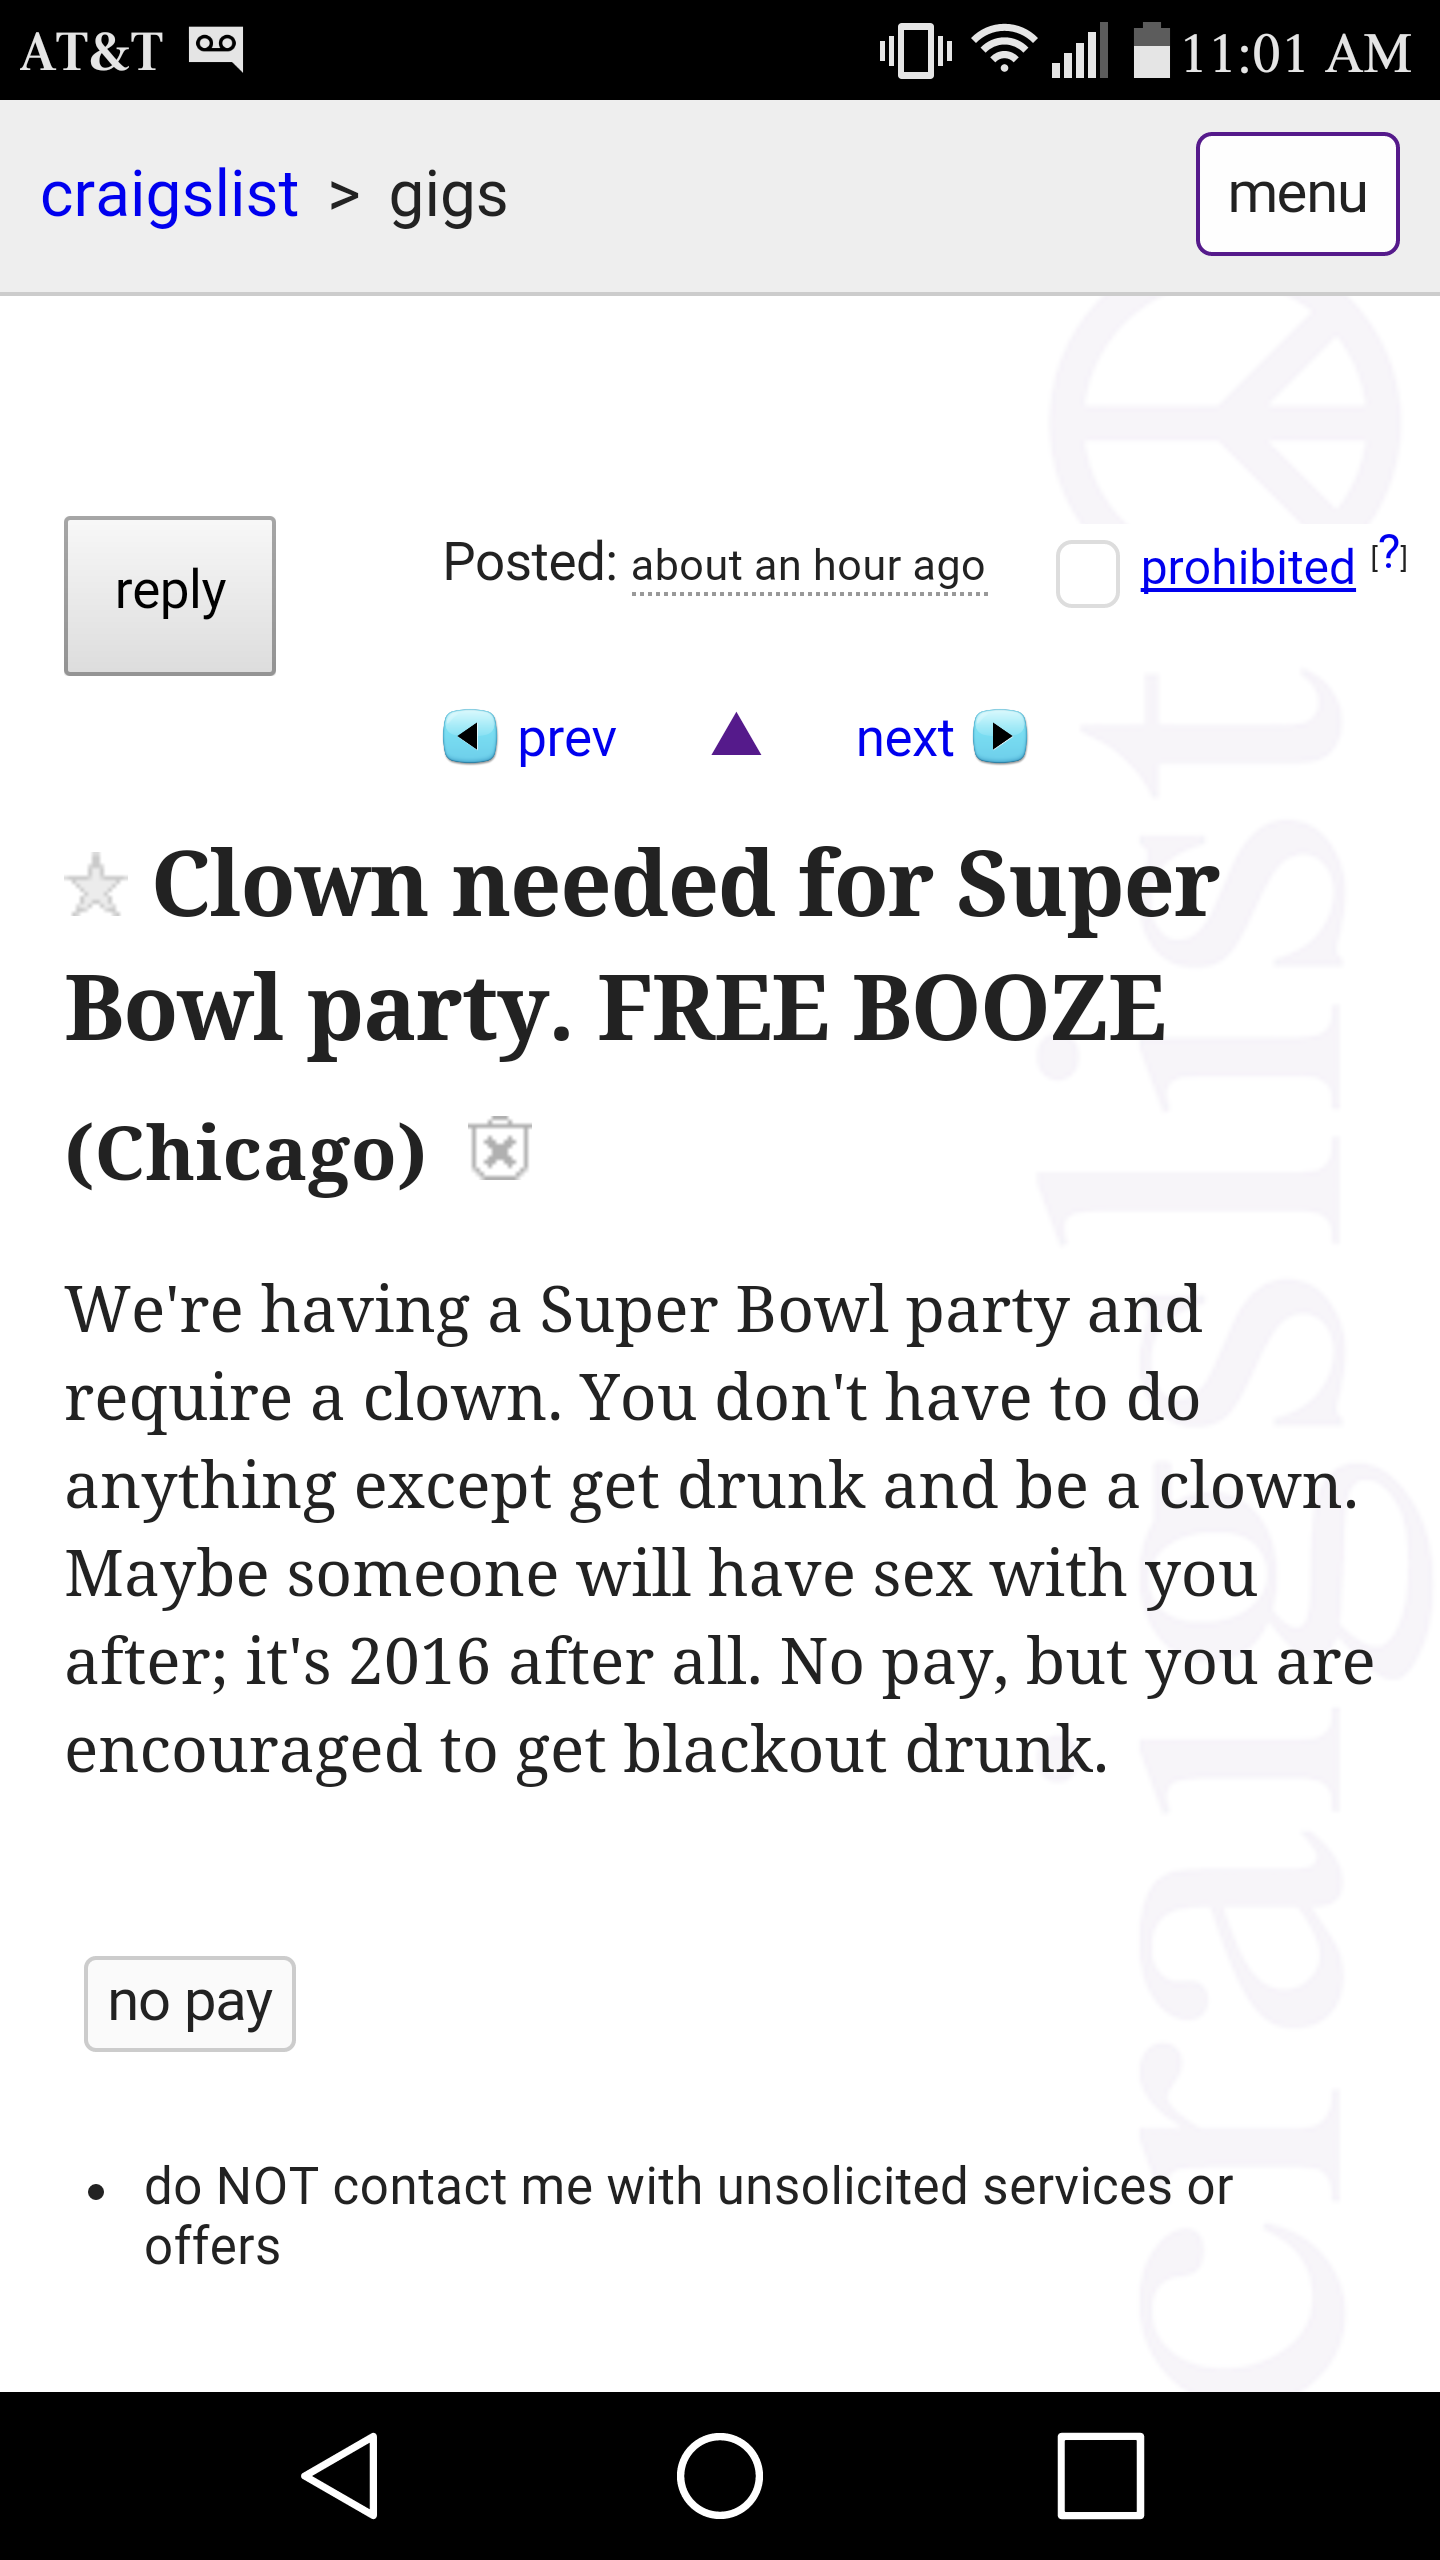 Sounds like a fun party